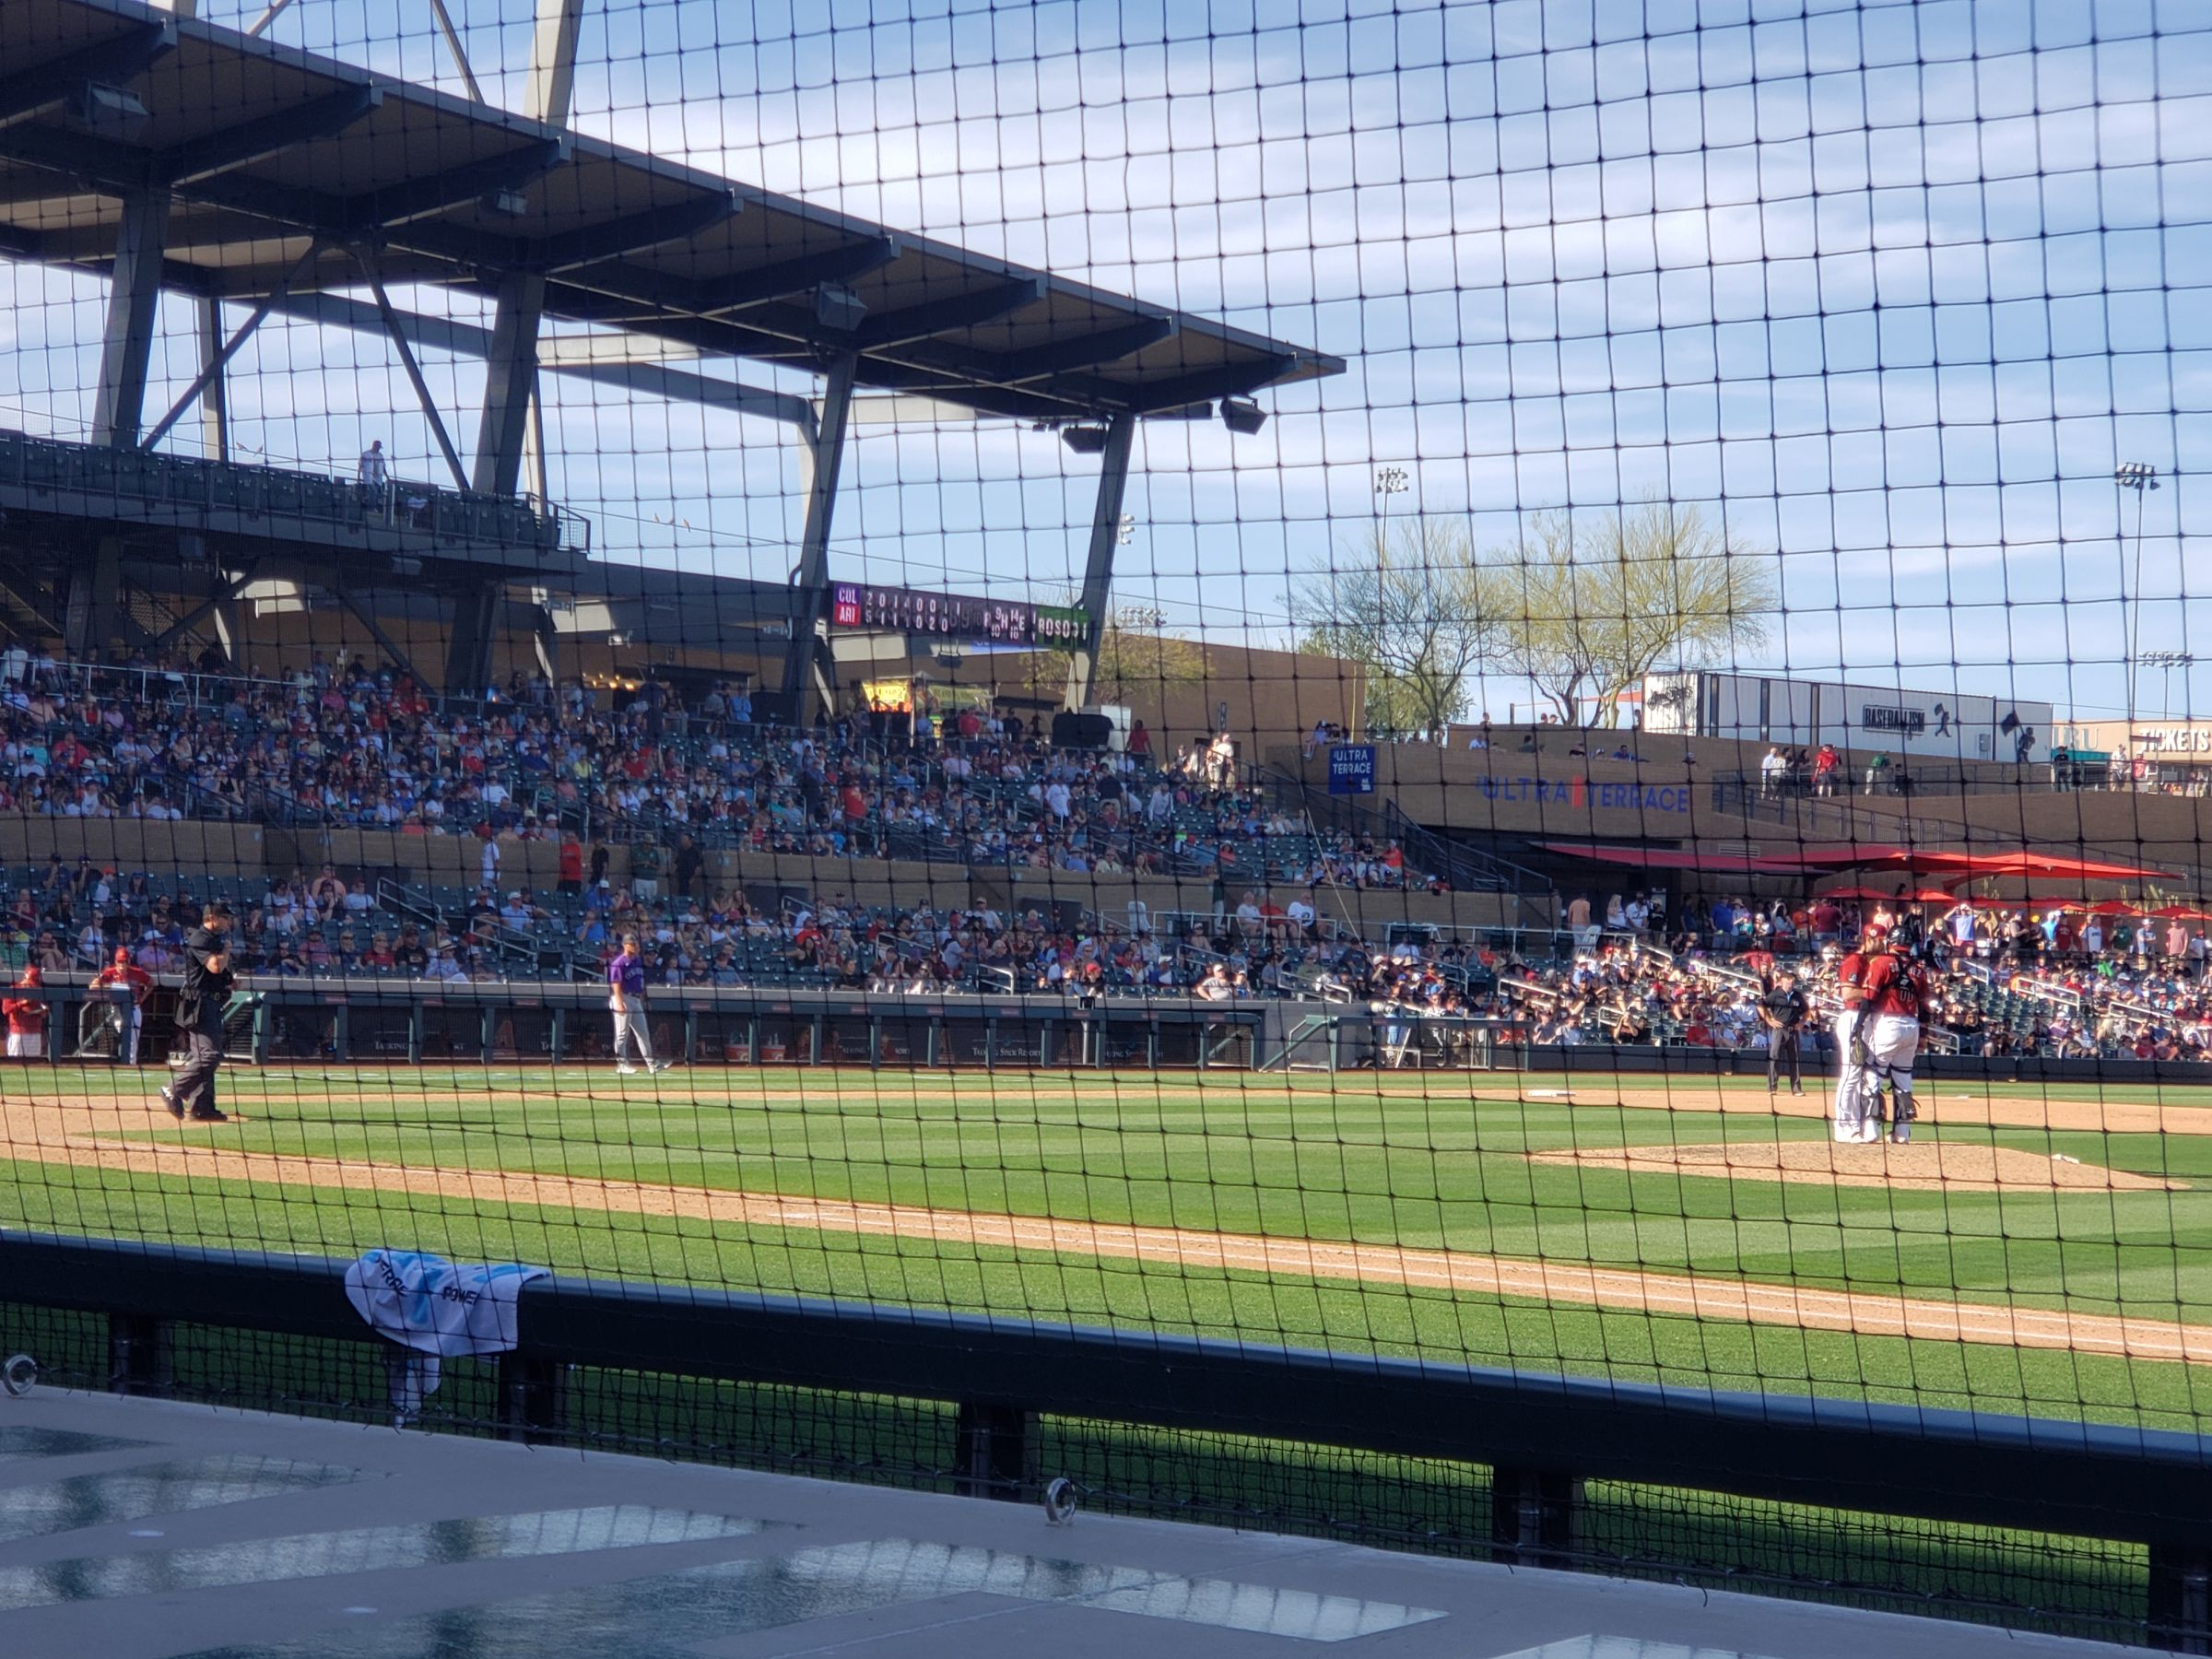 section 106, row 6 seat view  - salt river field at talking stick